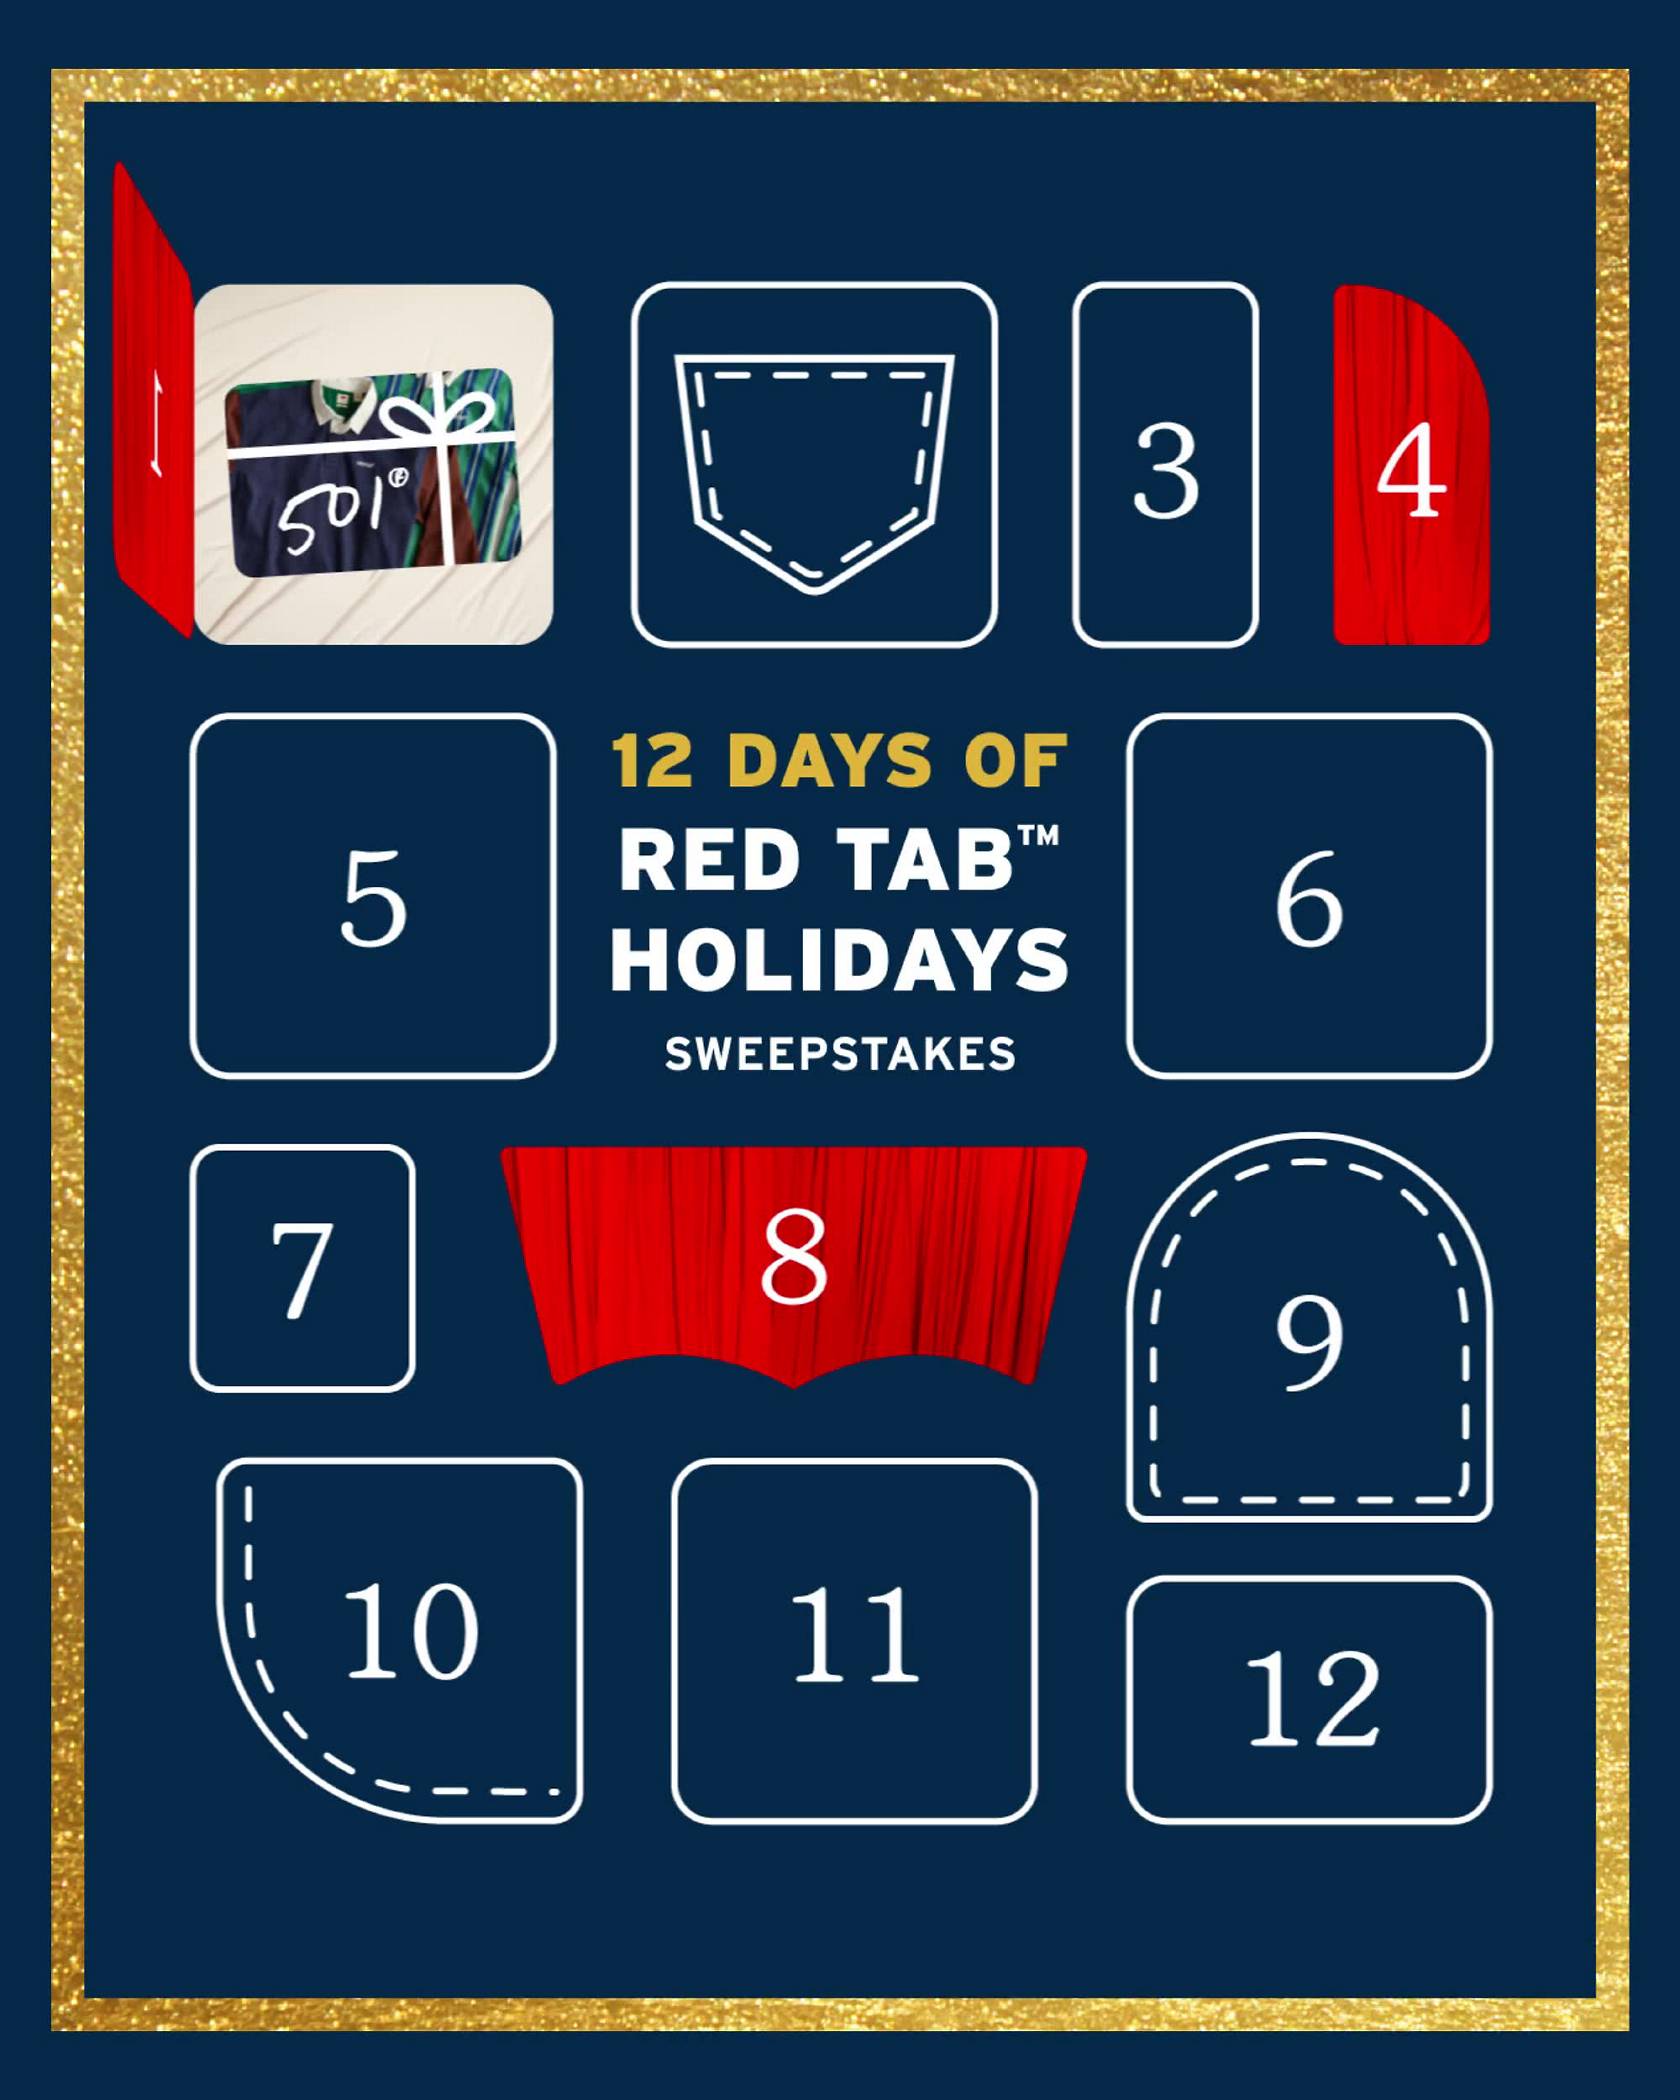 Levi's blue advent calendar that opens showing $501 gift cards